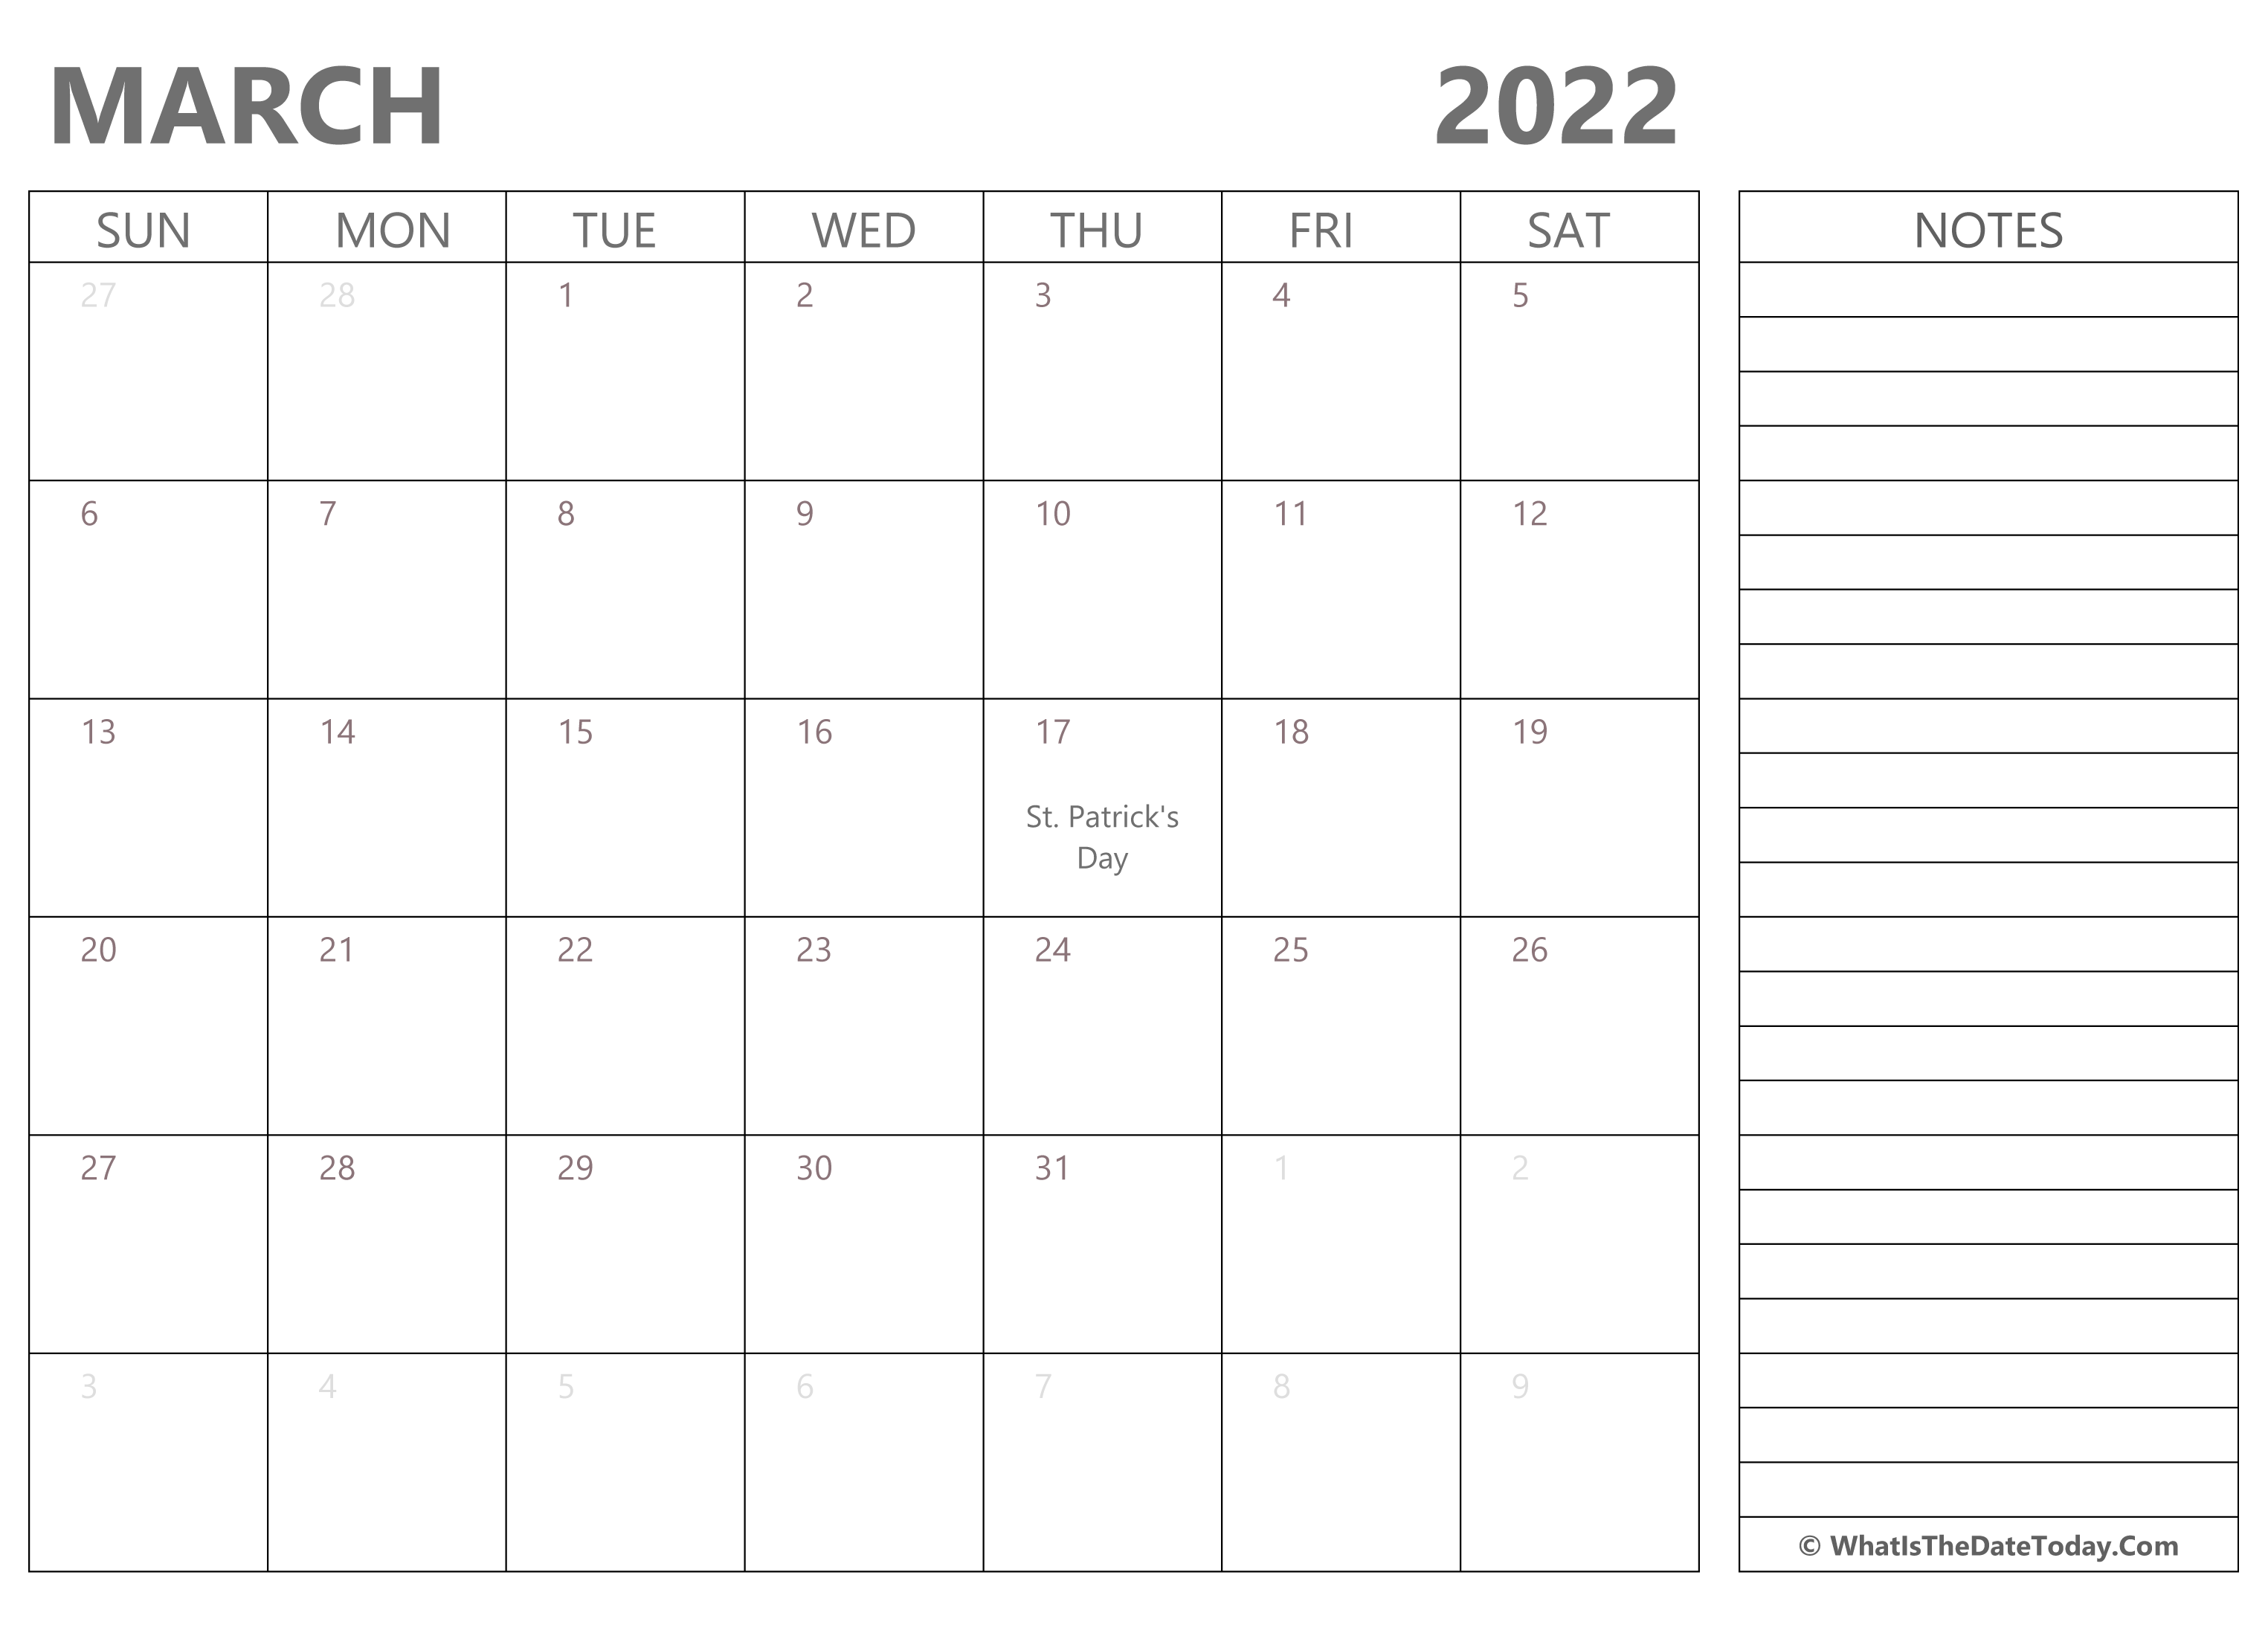 Editable Calendar March 2022 Editable March 2022 Calendar With Holidays And Notes |  Whatisthedatetoday.com